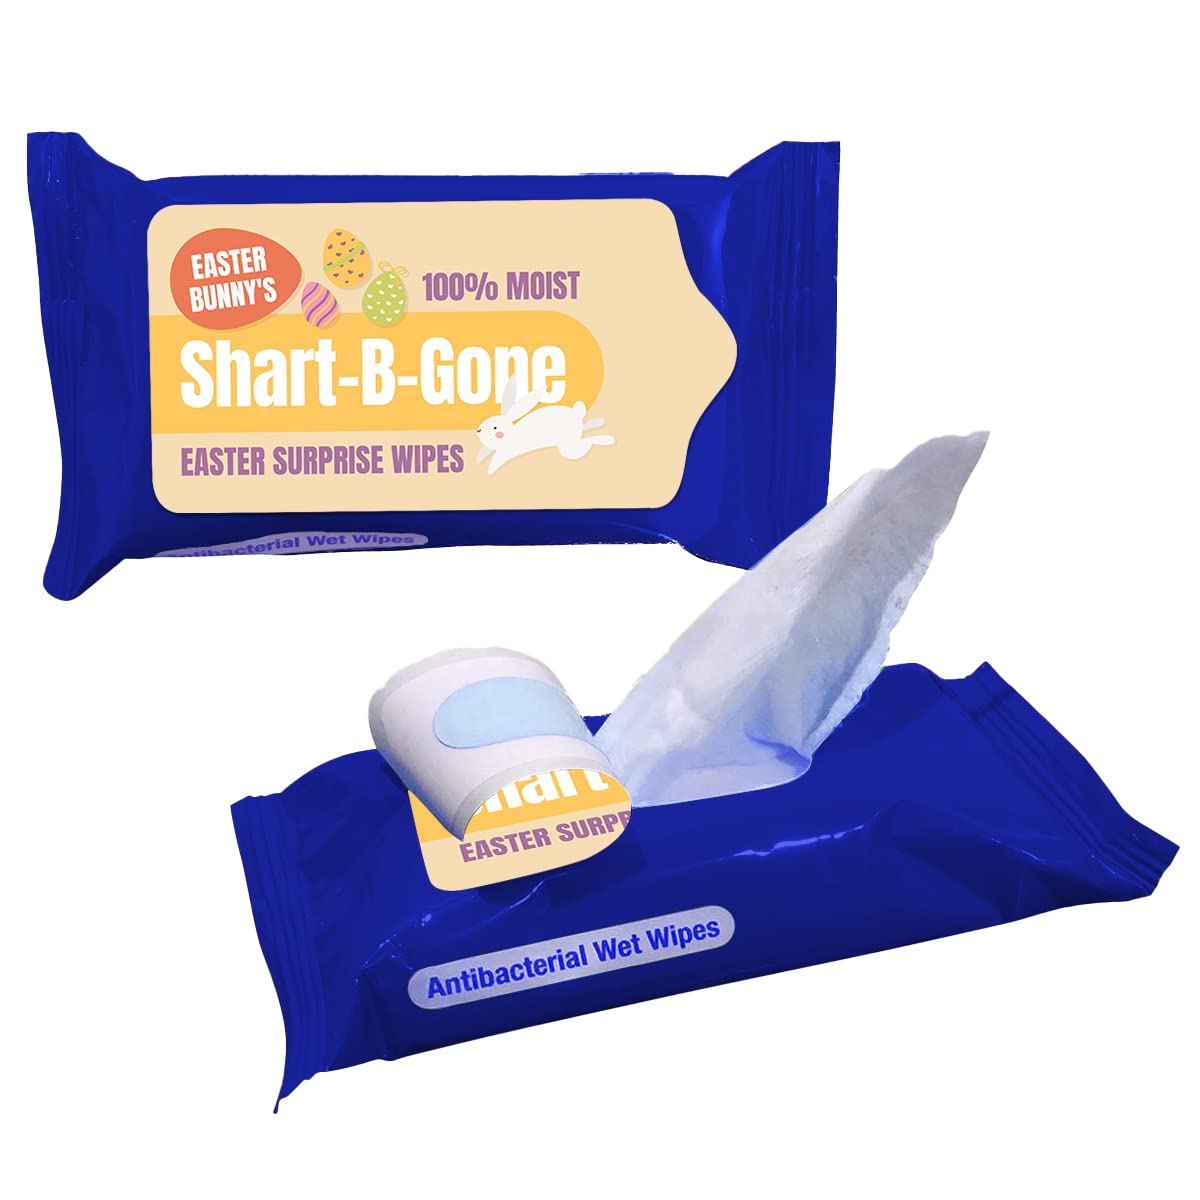 Easter Bunny Shart B Gone Moist Wipes - Funny Teen Gift Basket Ideas Travel Pocket Sized Sharted Wipes Disposable Towelettes Gears Out